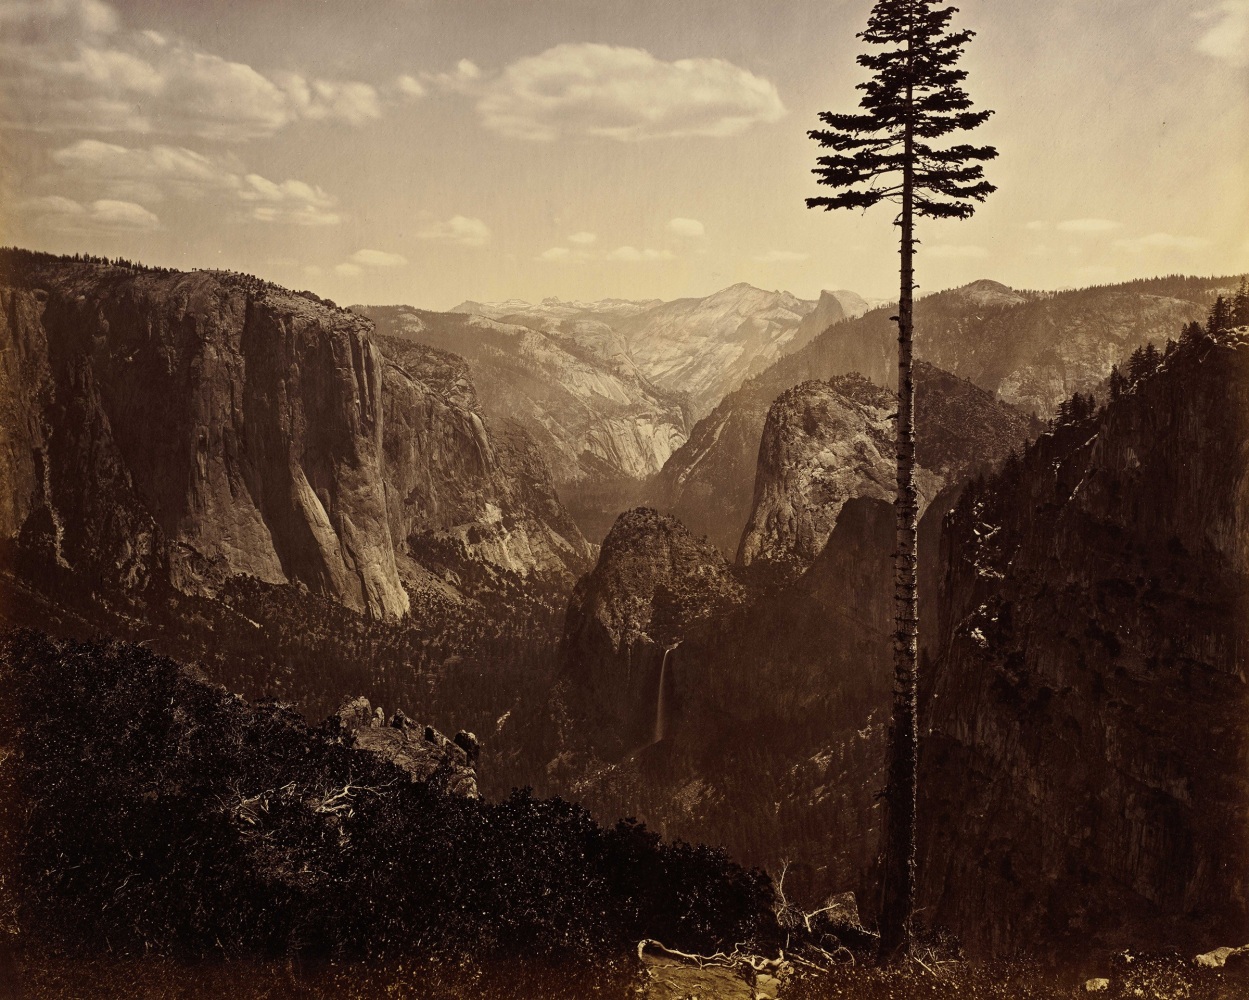 Carleton E. WATKINS (American, 1829-1916) Yosemite Valley from the &quot;Best General View&quot;, 1866 Mammoth plate albumen print. 40.6 x 50.8 cm mounted on card